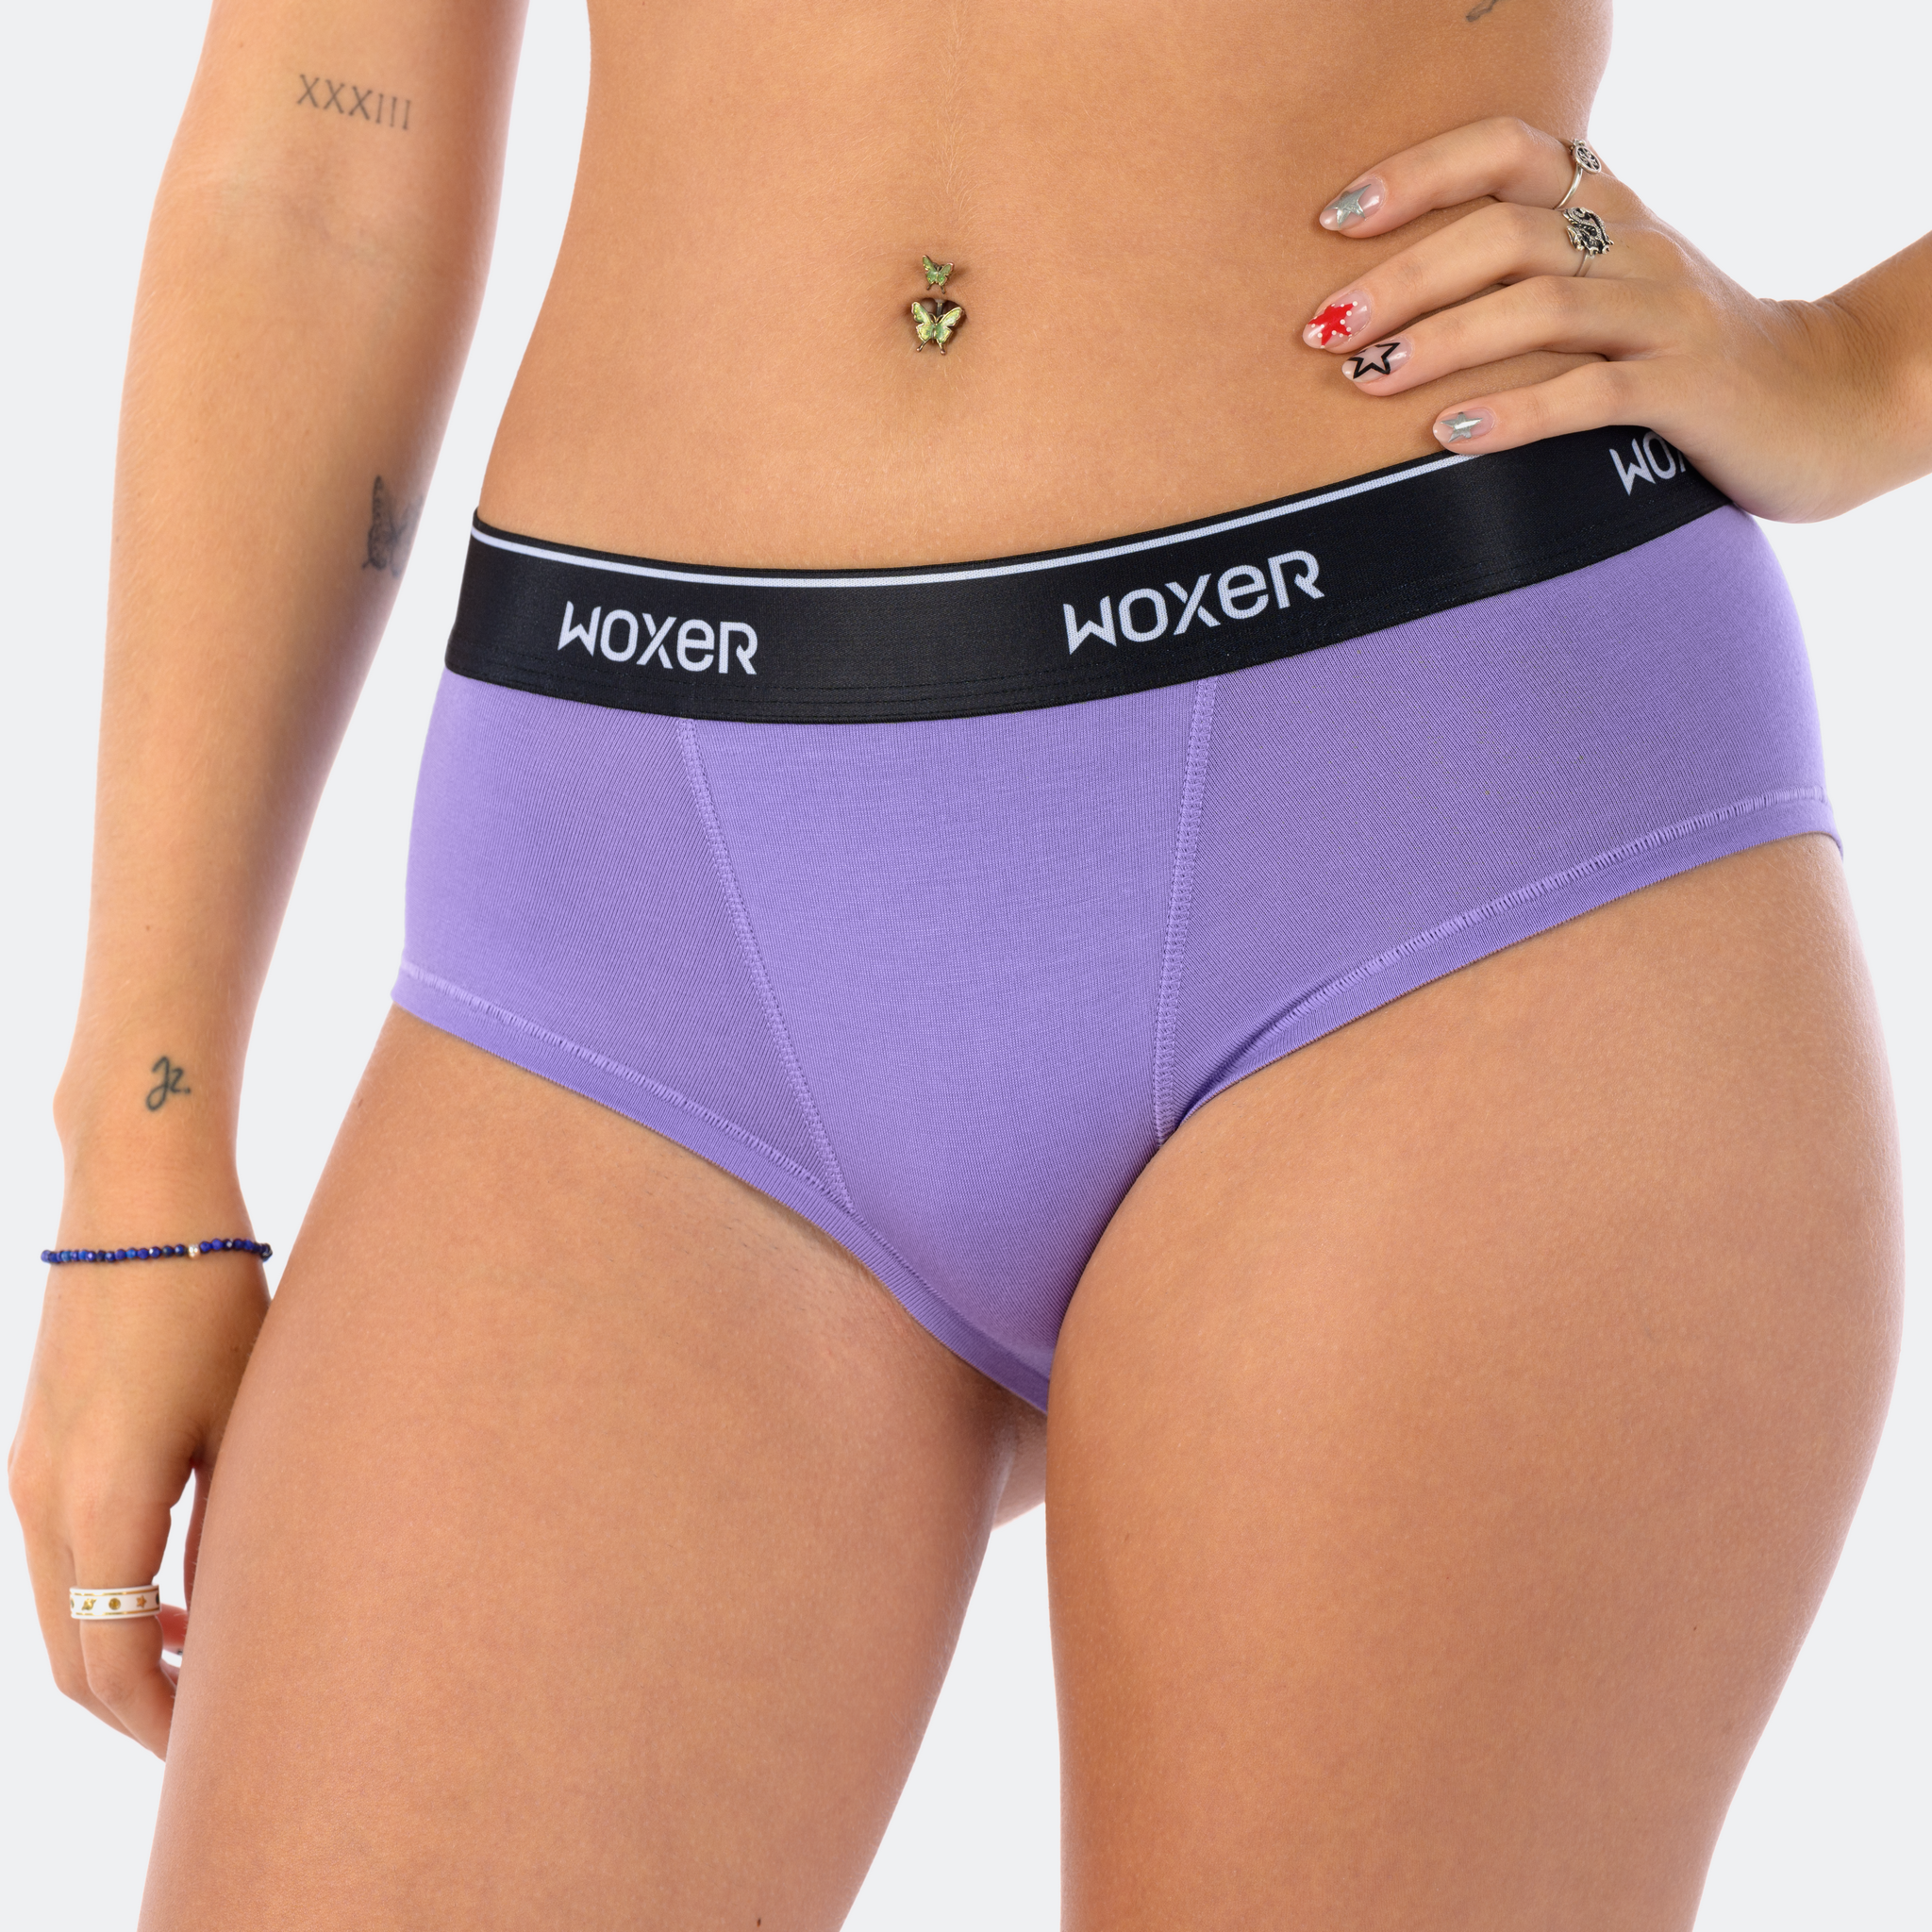 Woxer brand, Womxn's boxer briefs, Size M, Muted purple